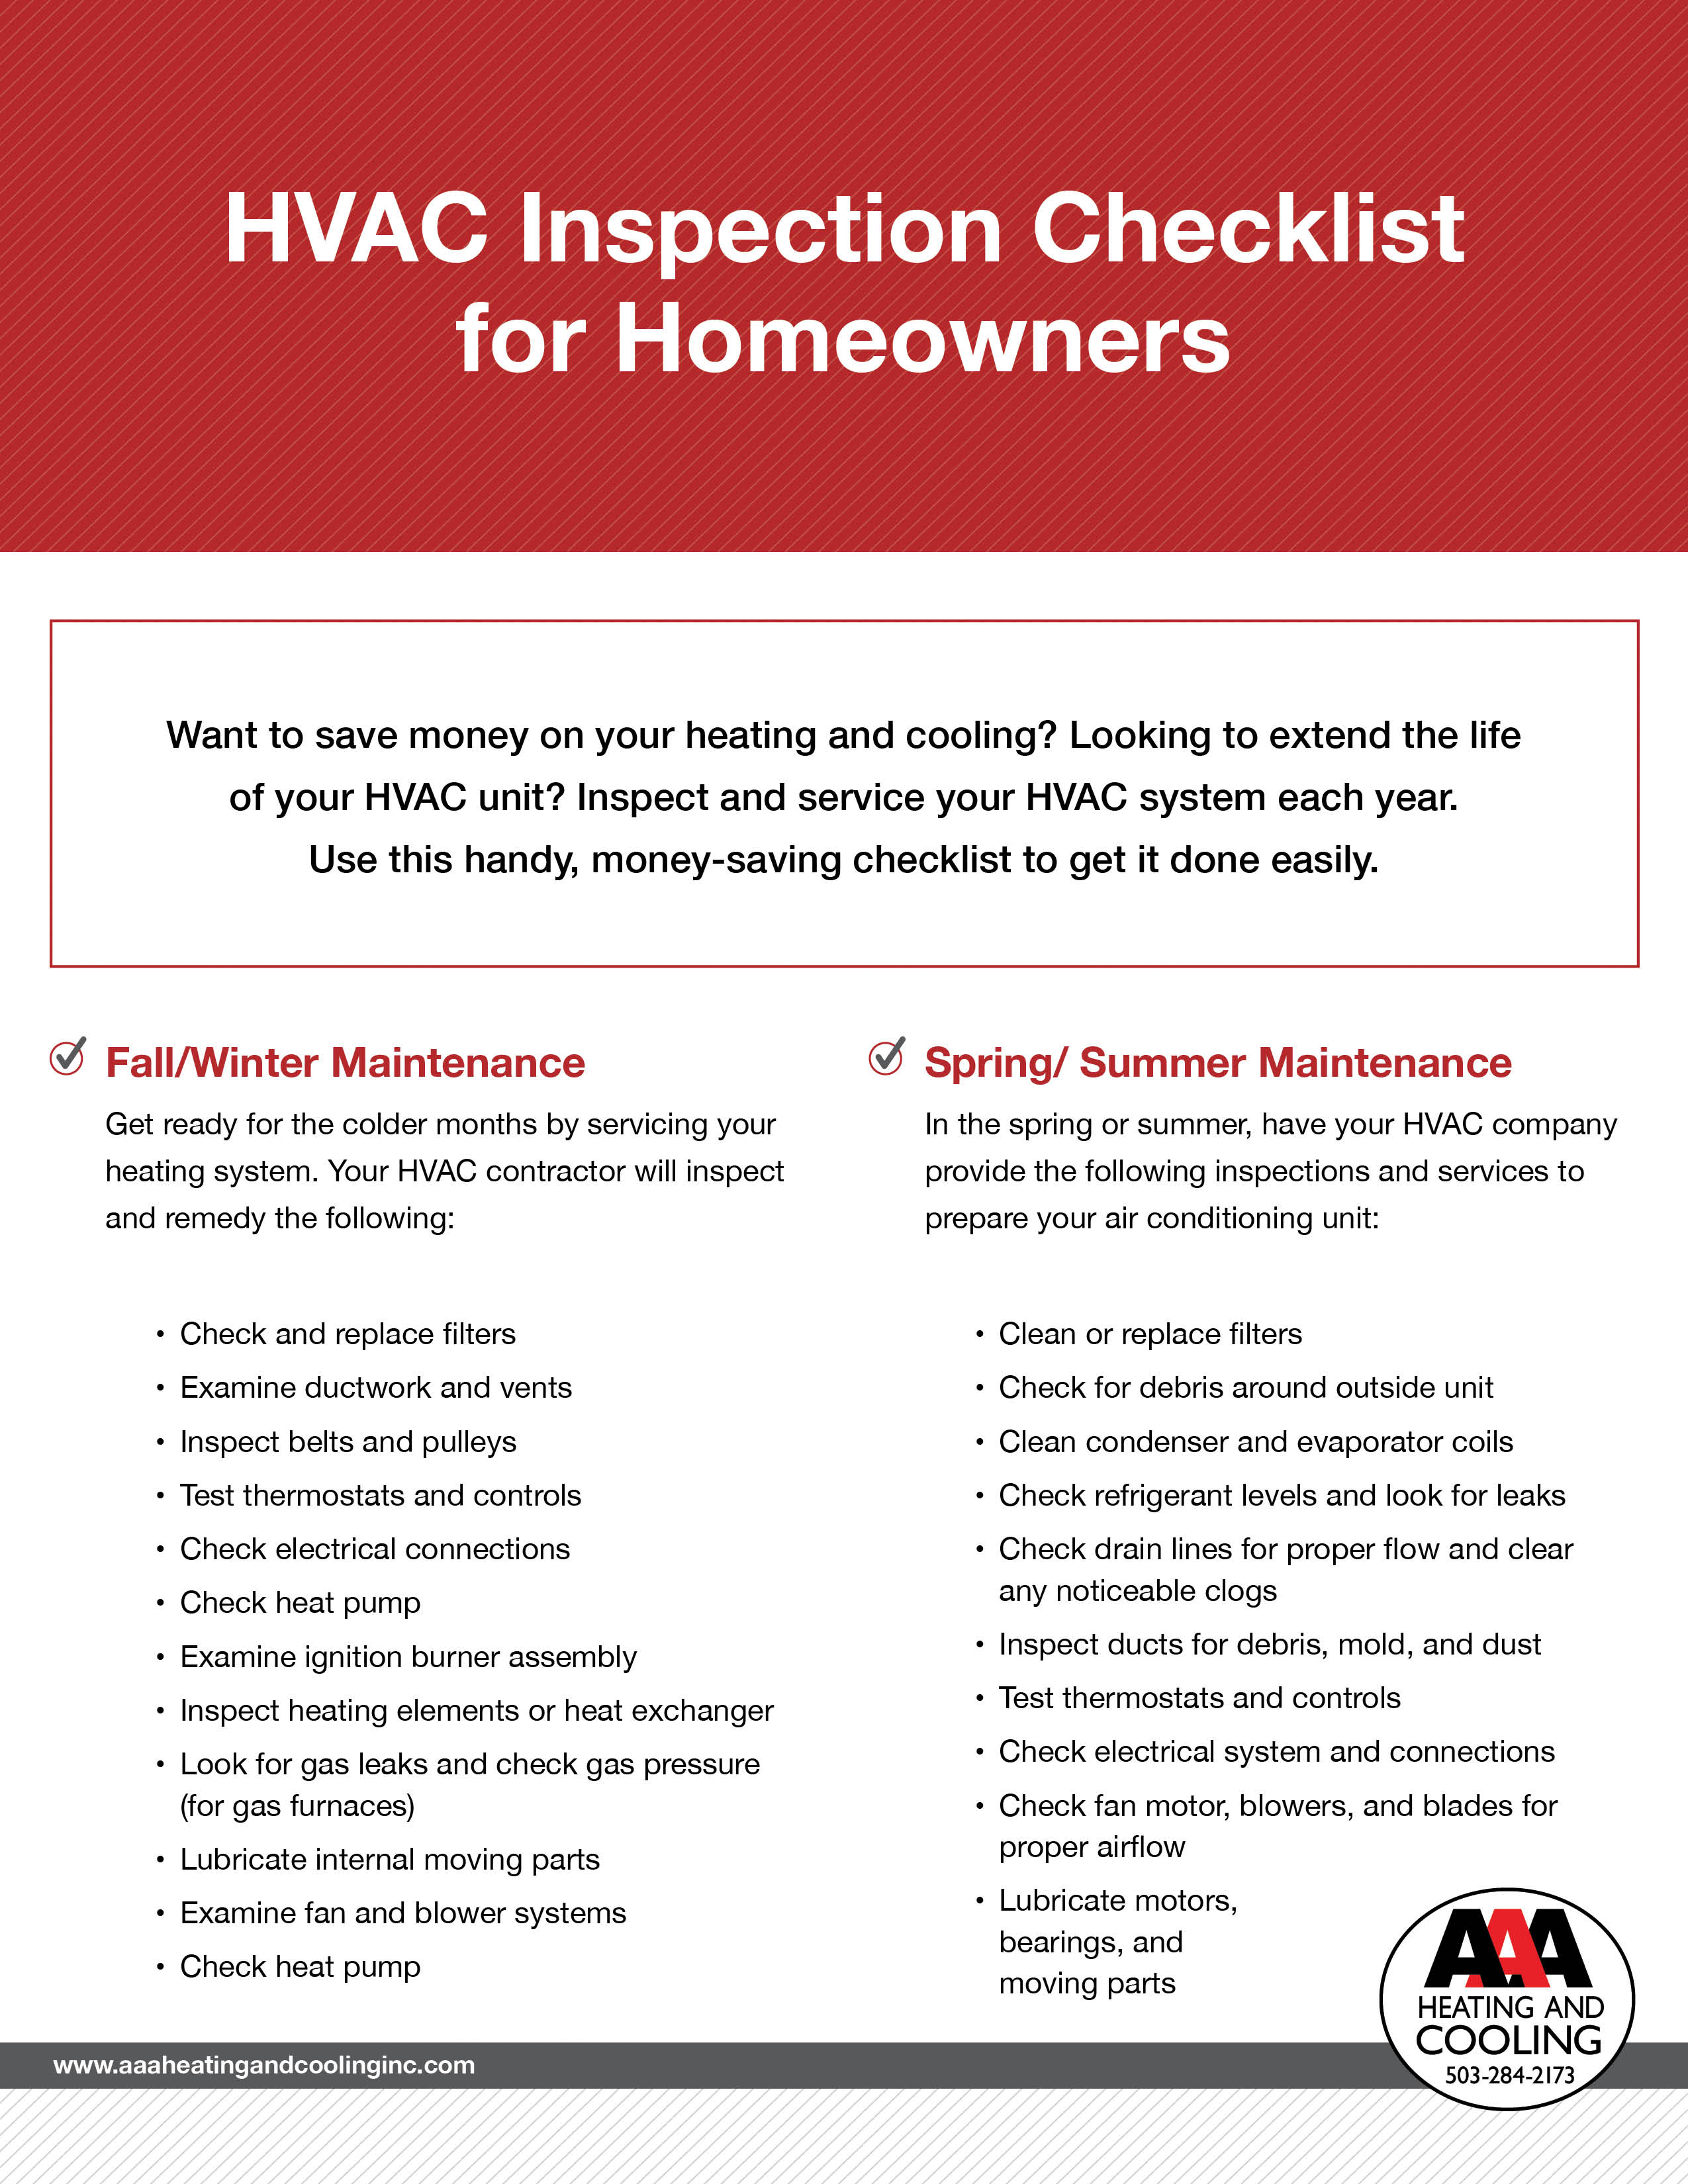 aaa-hvac-inspection-checklist-for-homeowners-1